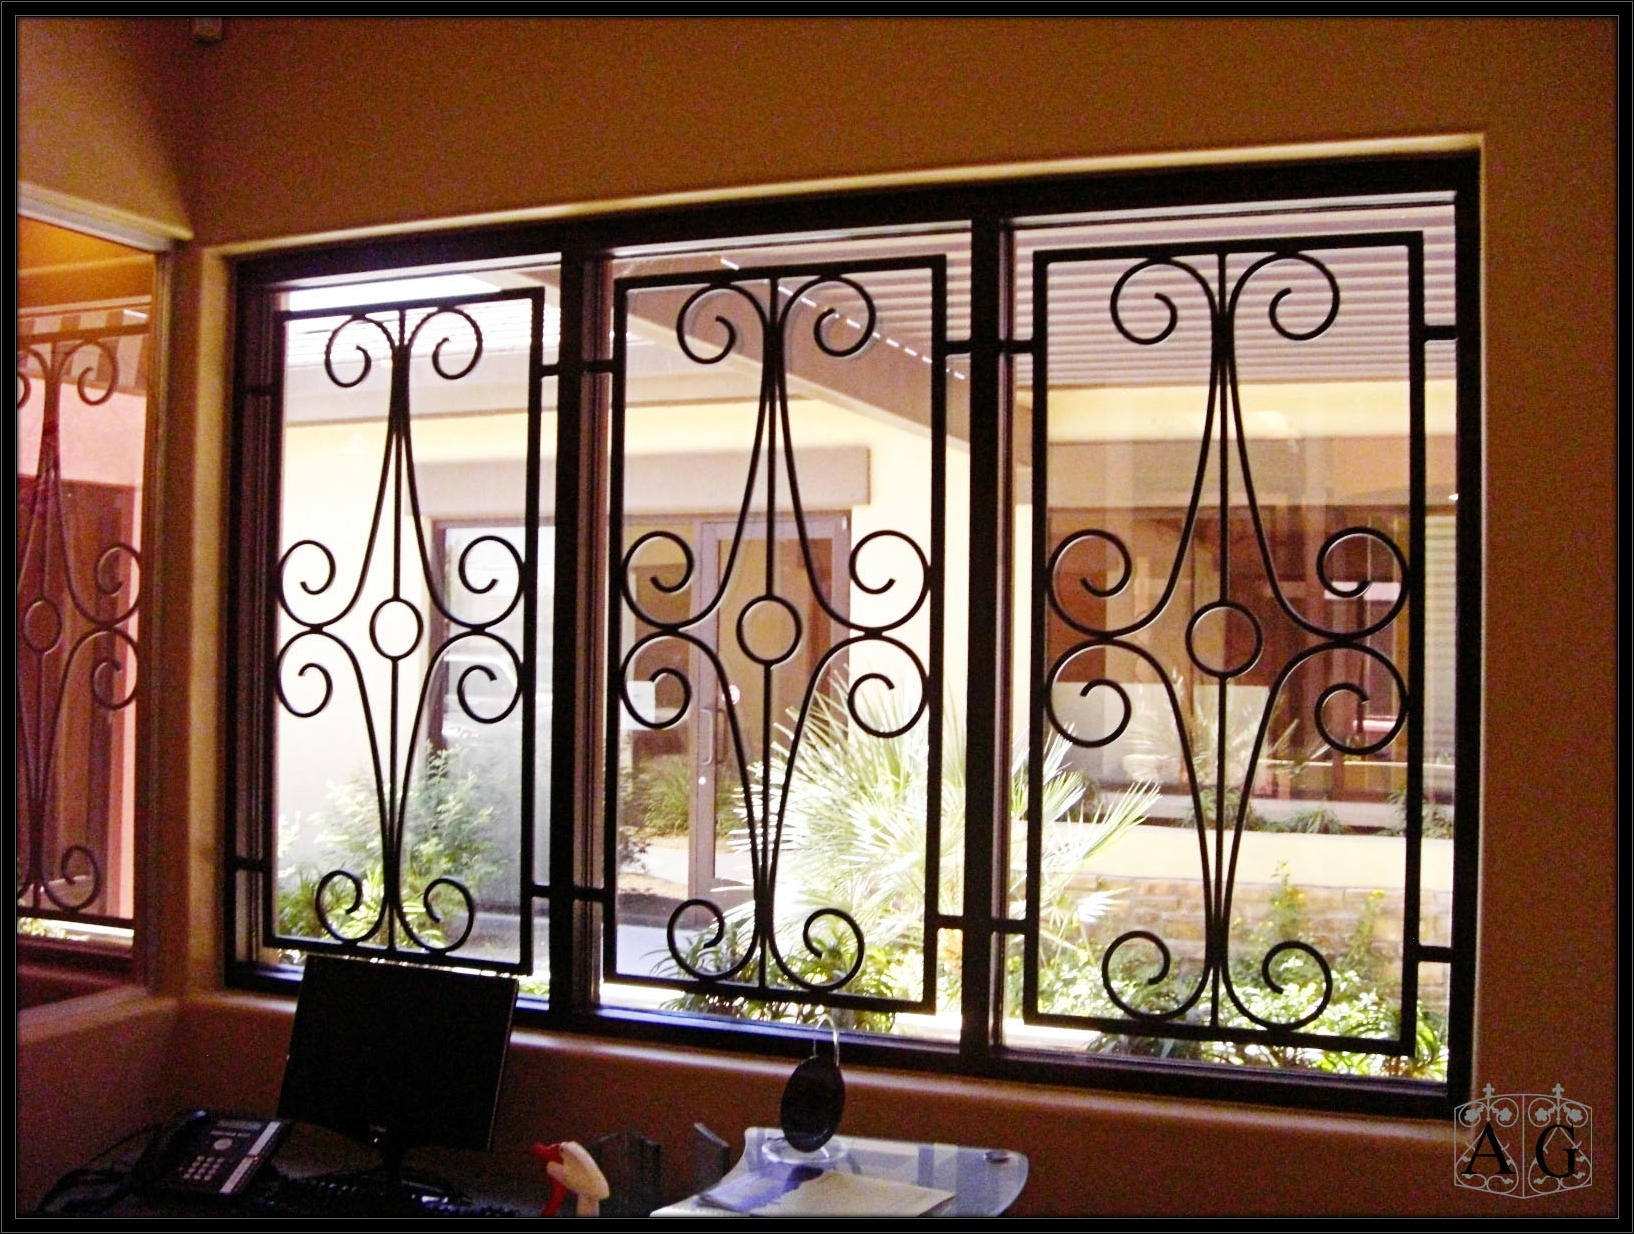 Decorative-Security-Bars-for-Residential-Windows-Anthropology